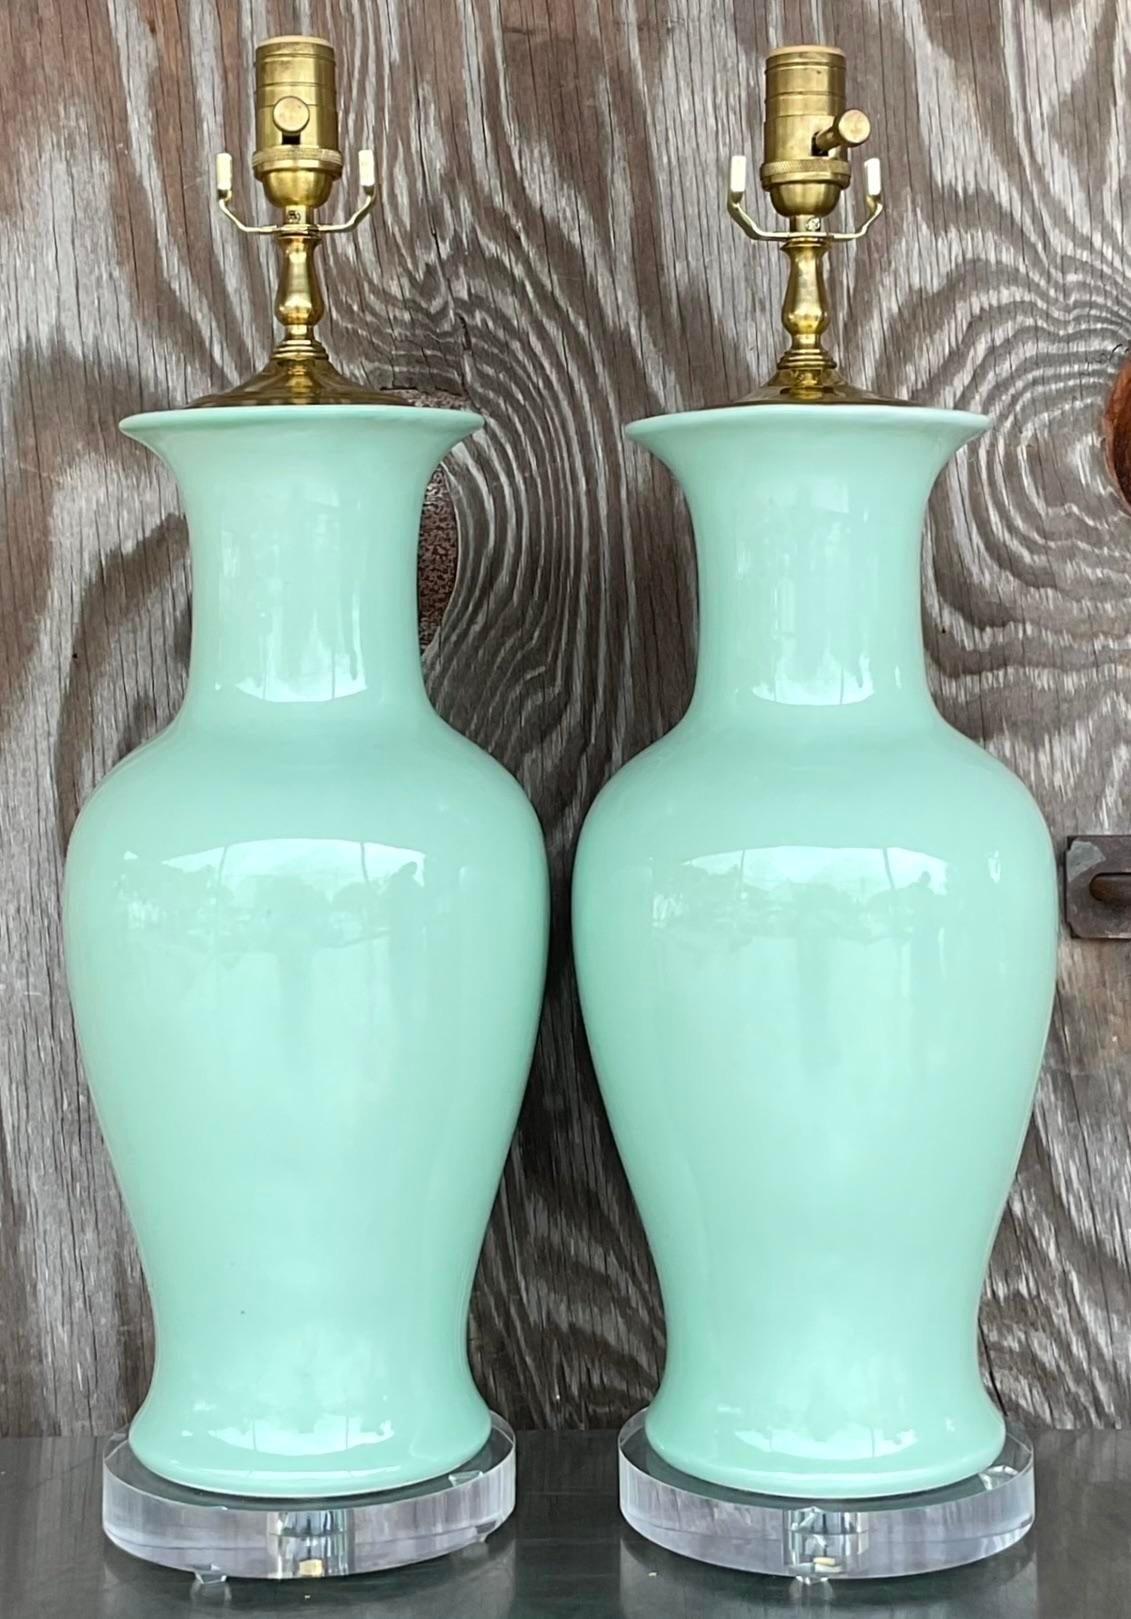 Late 20th Century Vintage Regency Glazed Ceramic Table Lamps - a Pair For Sale 3